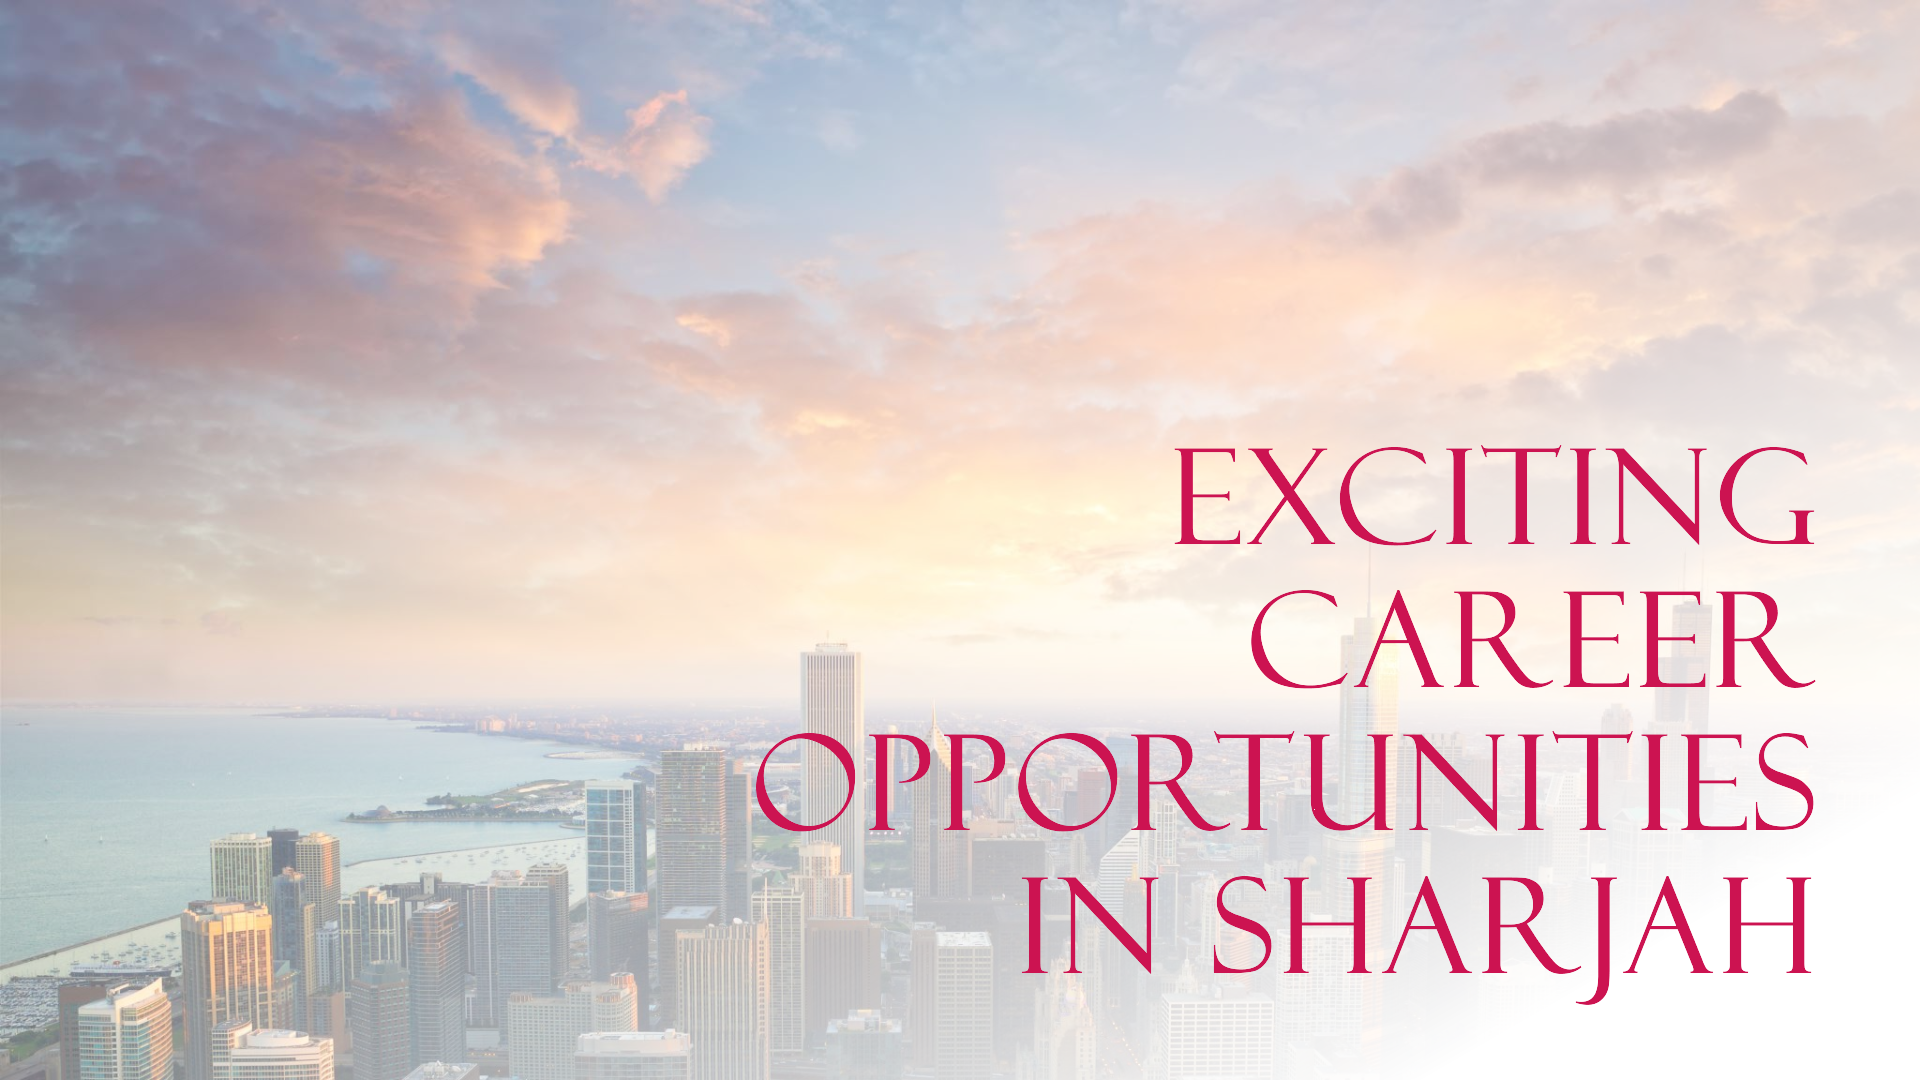 Sharjah careers for Arabic and English speakers with salary 8,900 AED